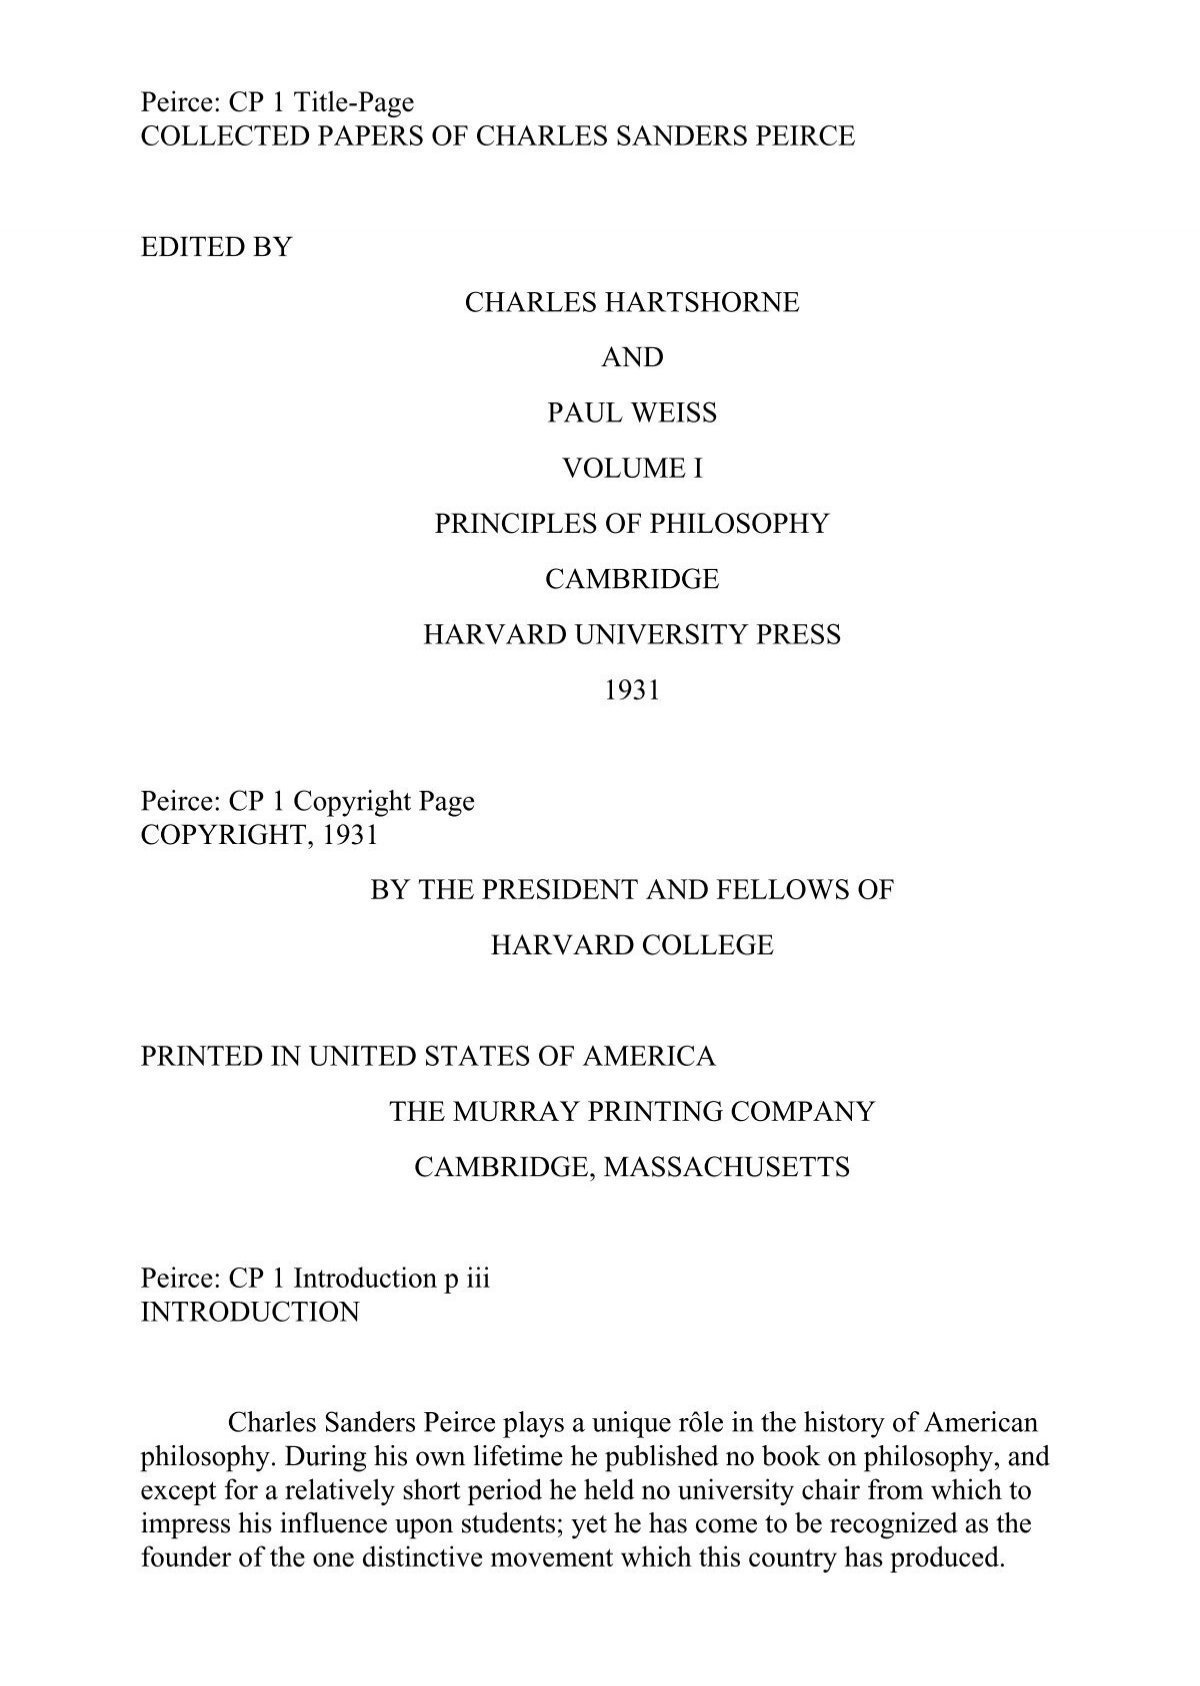 Peirce: CP 1 Title-Page COLLECTED PAPERS OF CHARLES